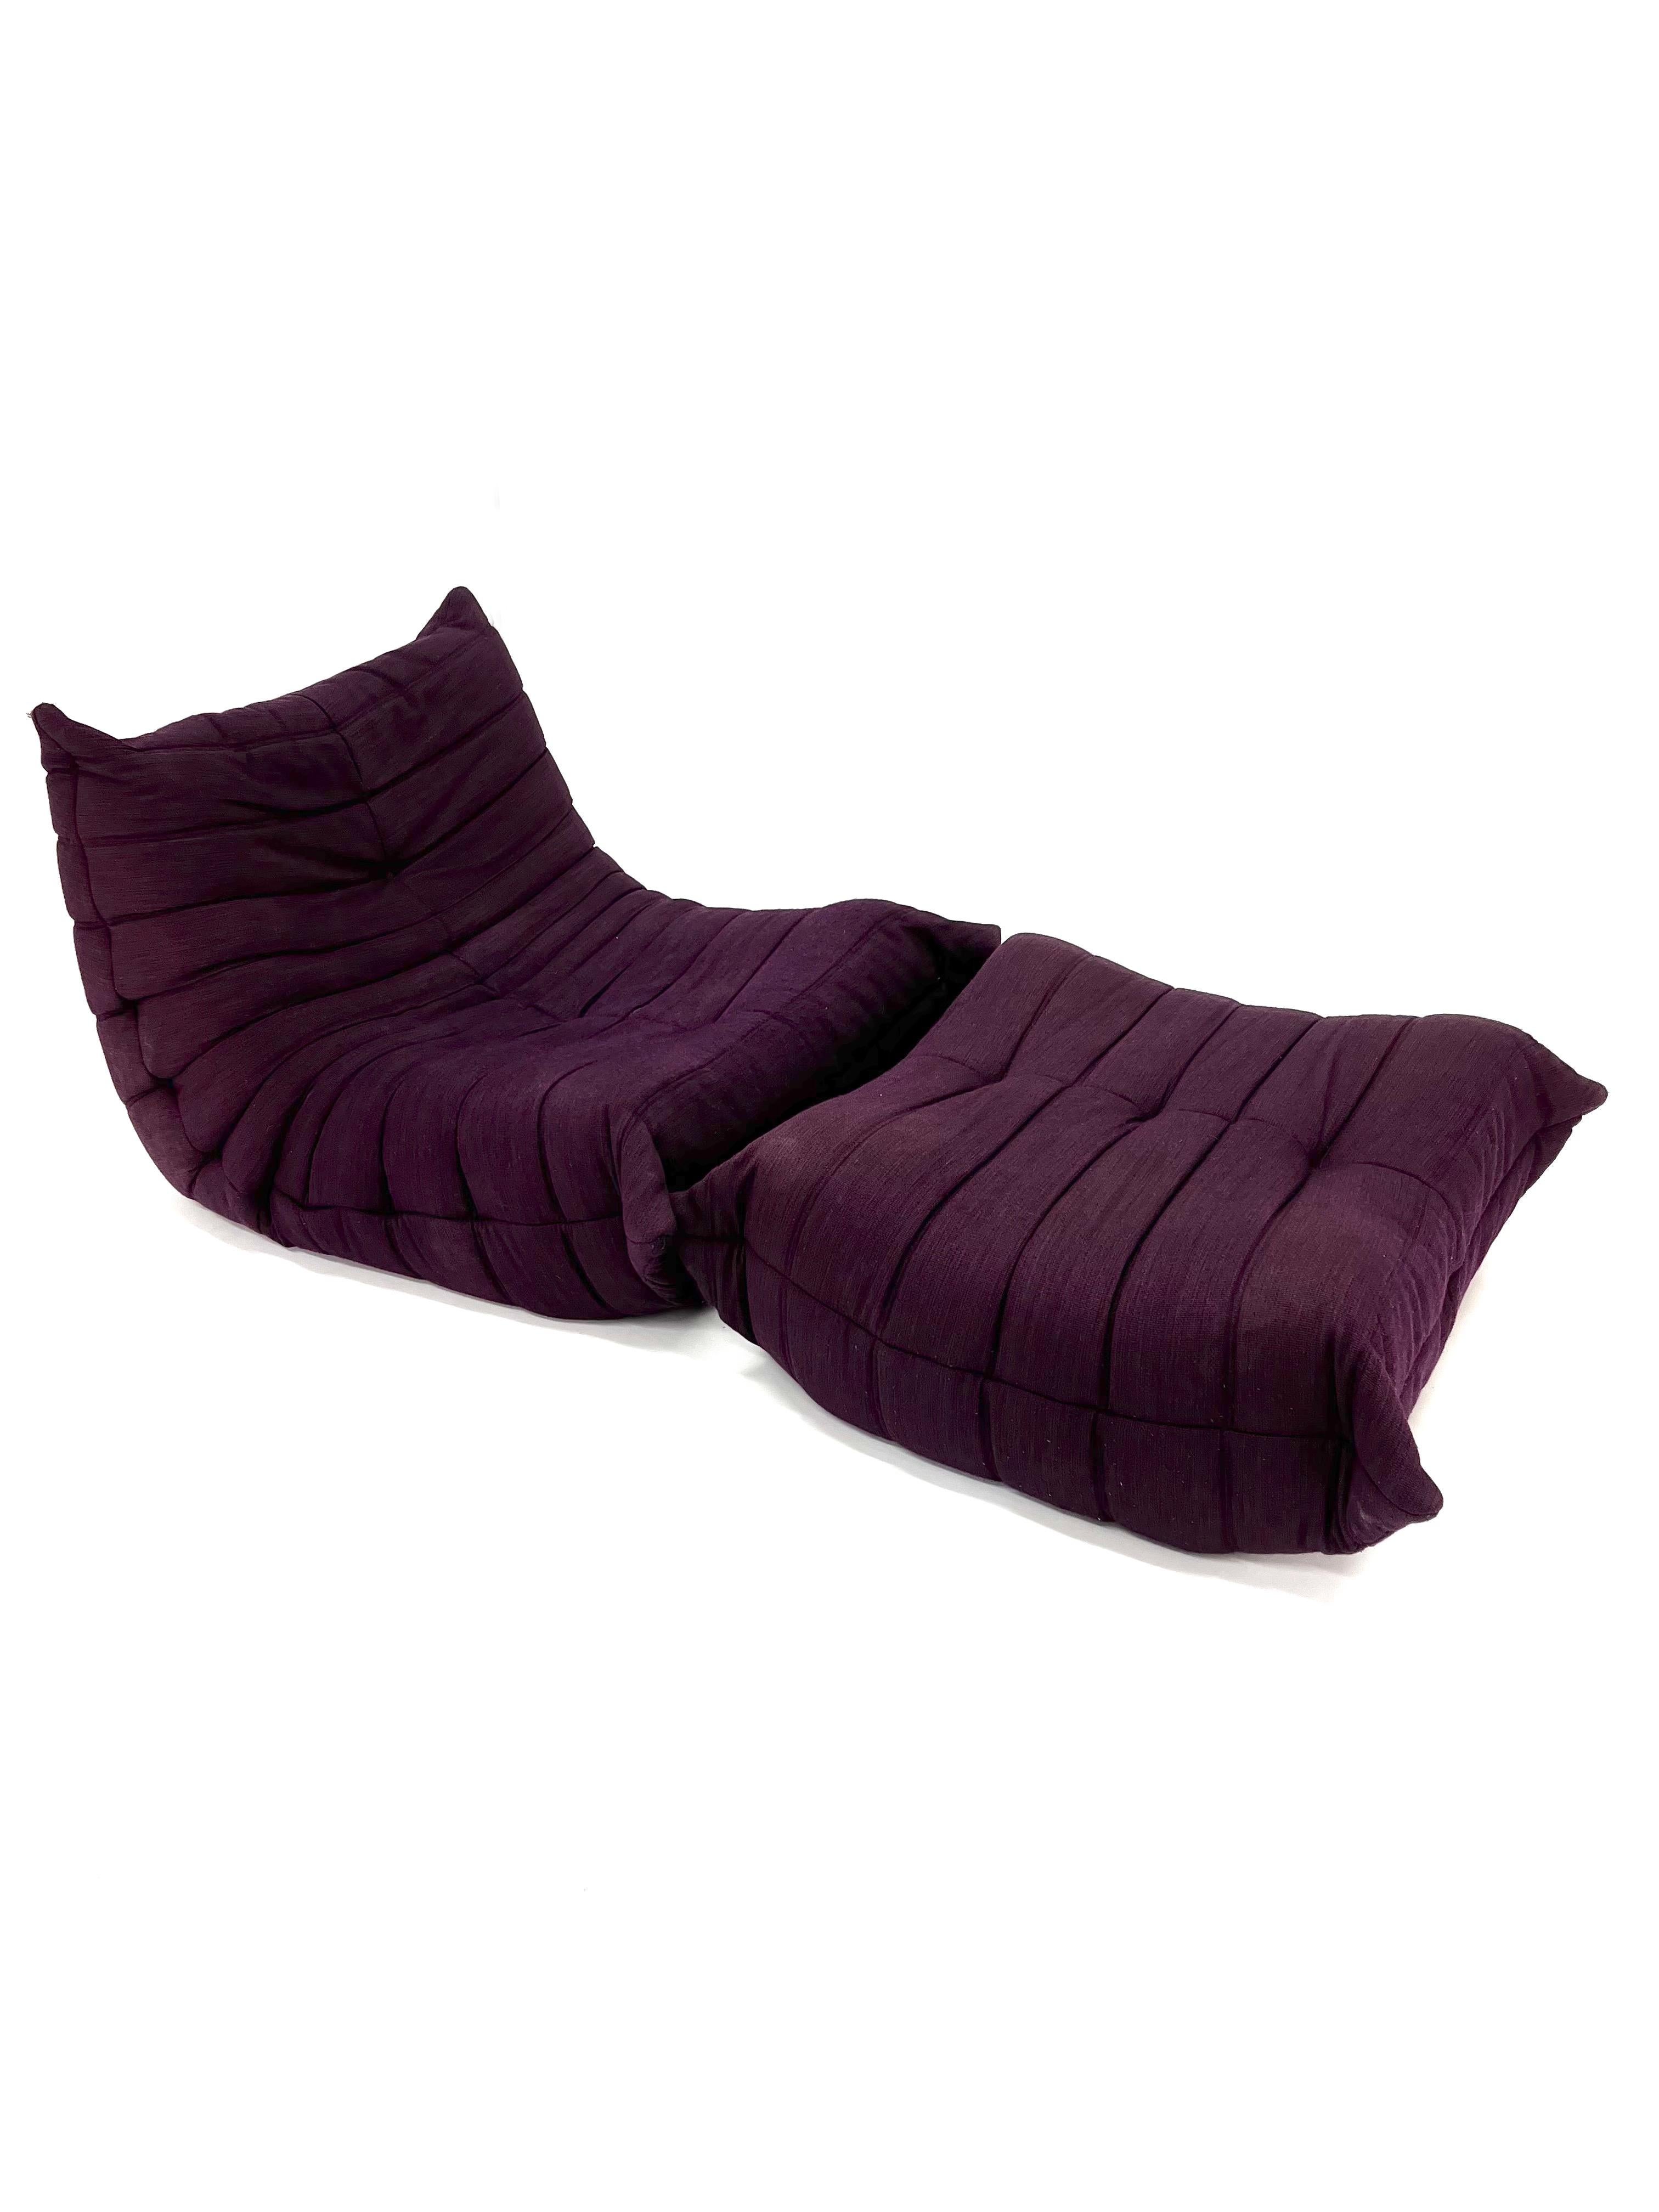 Late 20th Century Togo Chair and Ottoman in Purple by Michel Ducaroy for Ligne Roset For Sale